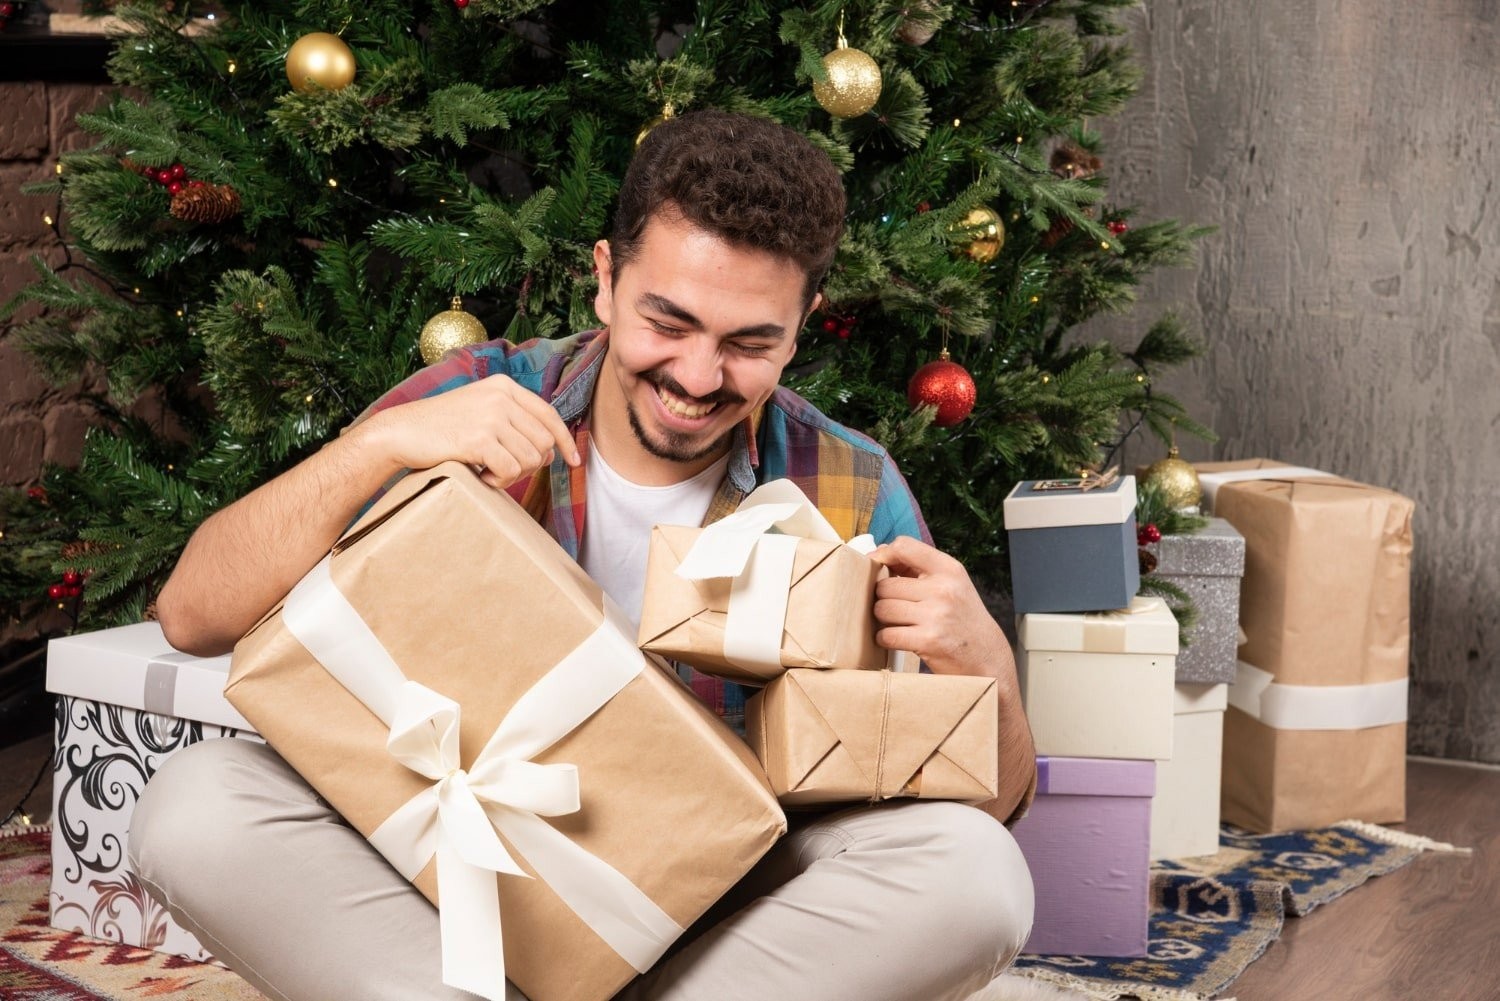 handsome-smiling-man-with-his-presents-min.jpg